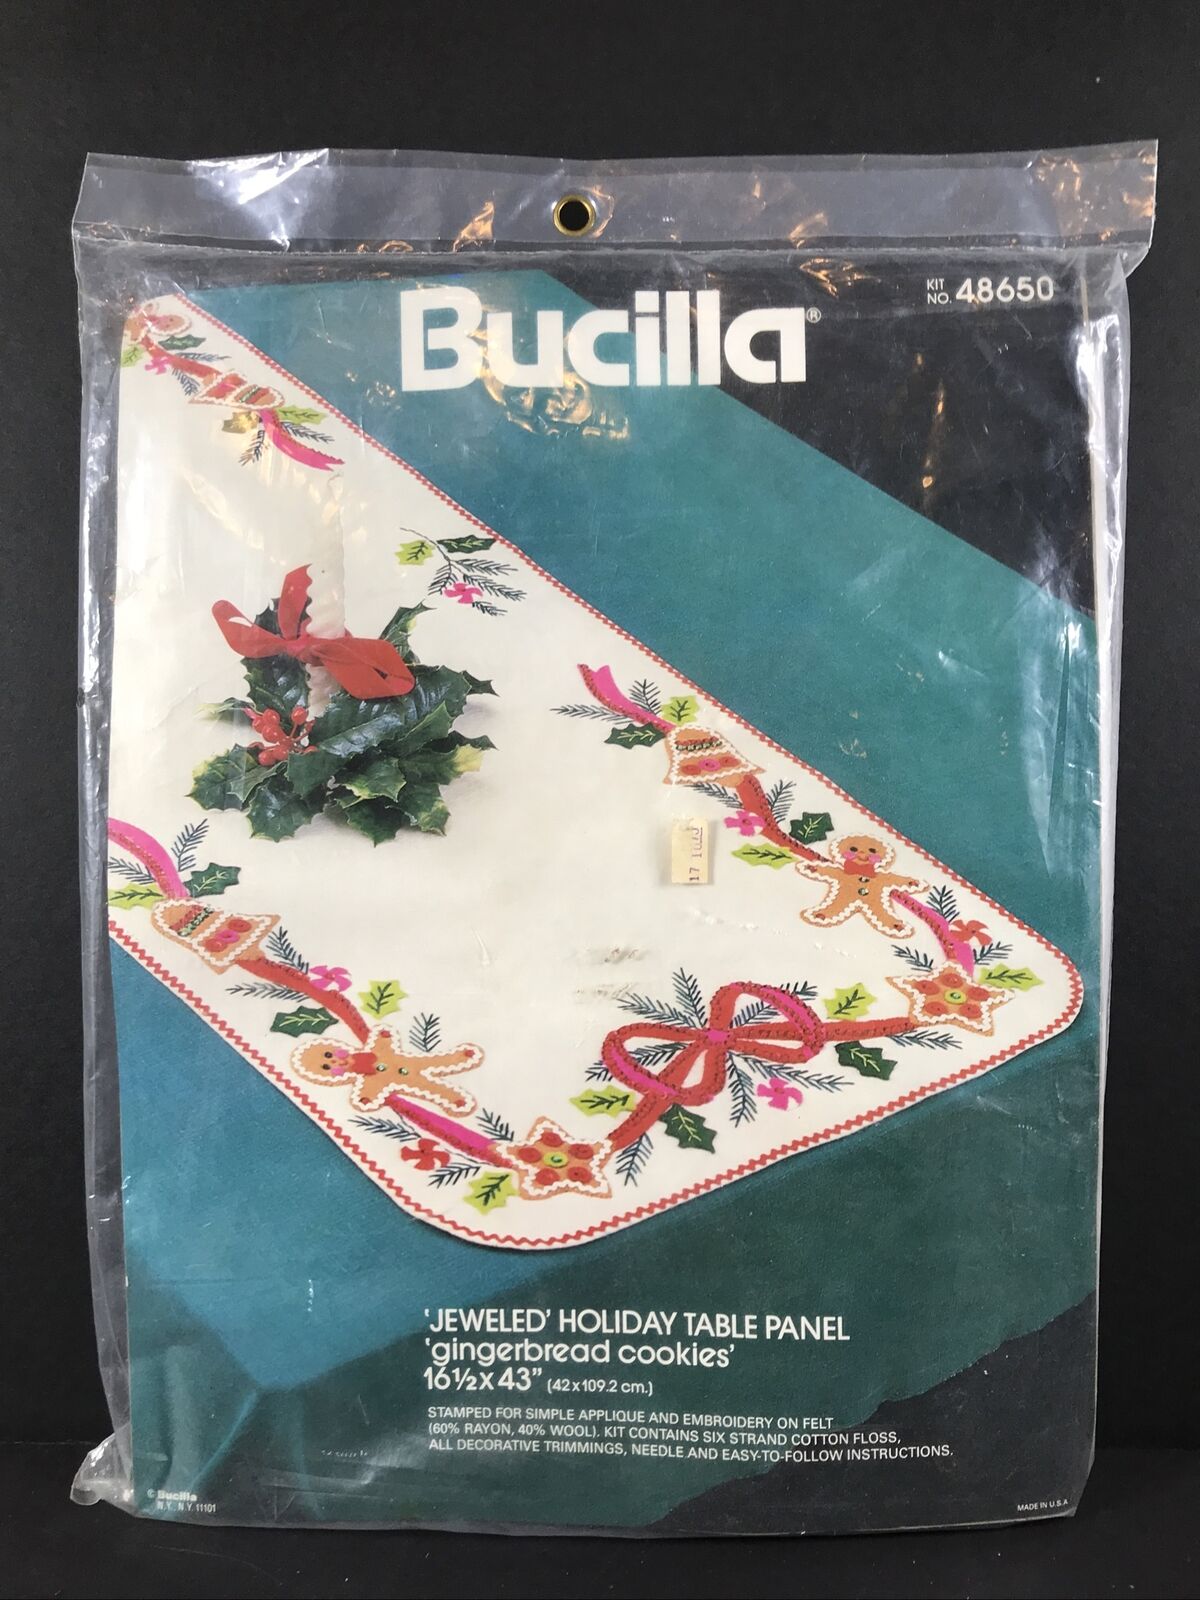 Bucilla Jeweled Holiday Table Panel Gingerbread Cookies 16.5”x43” Kit No 48650